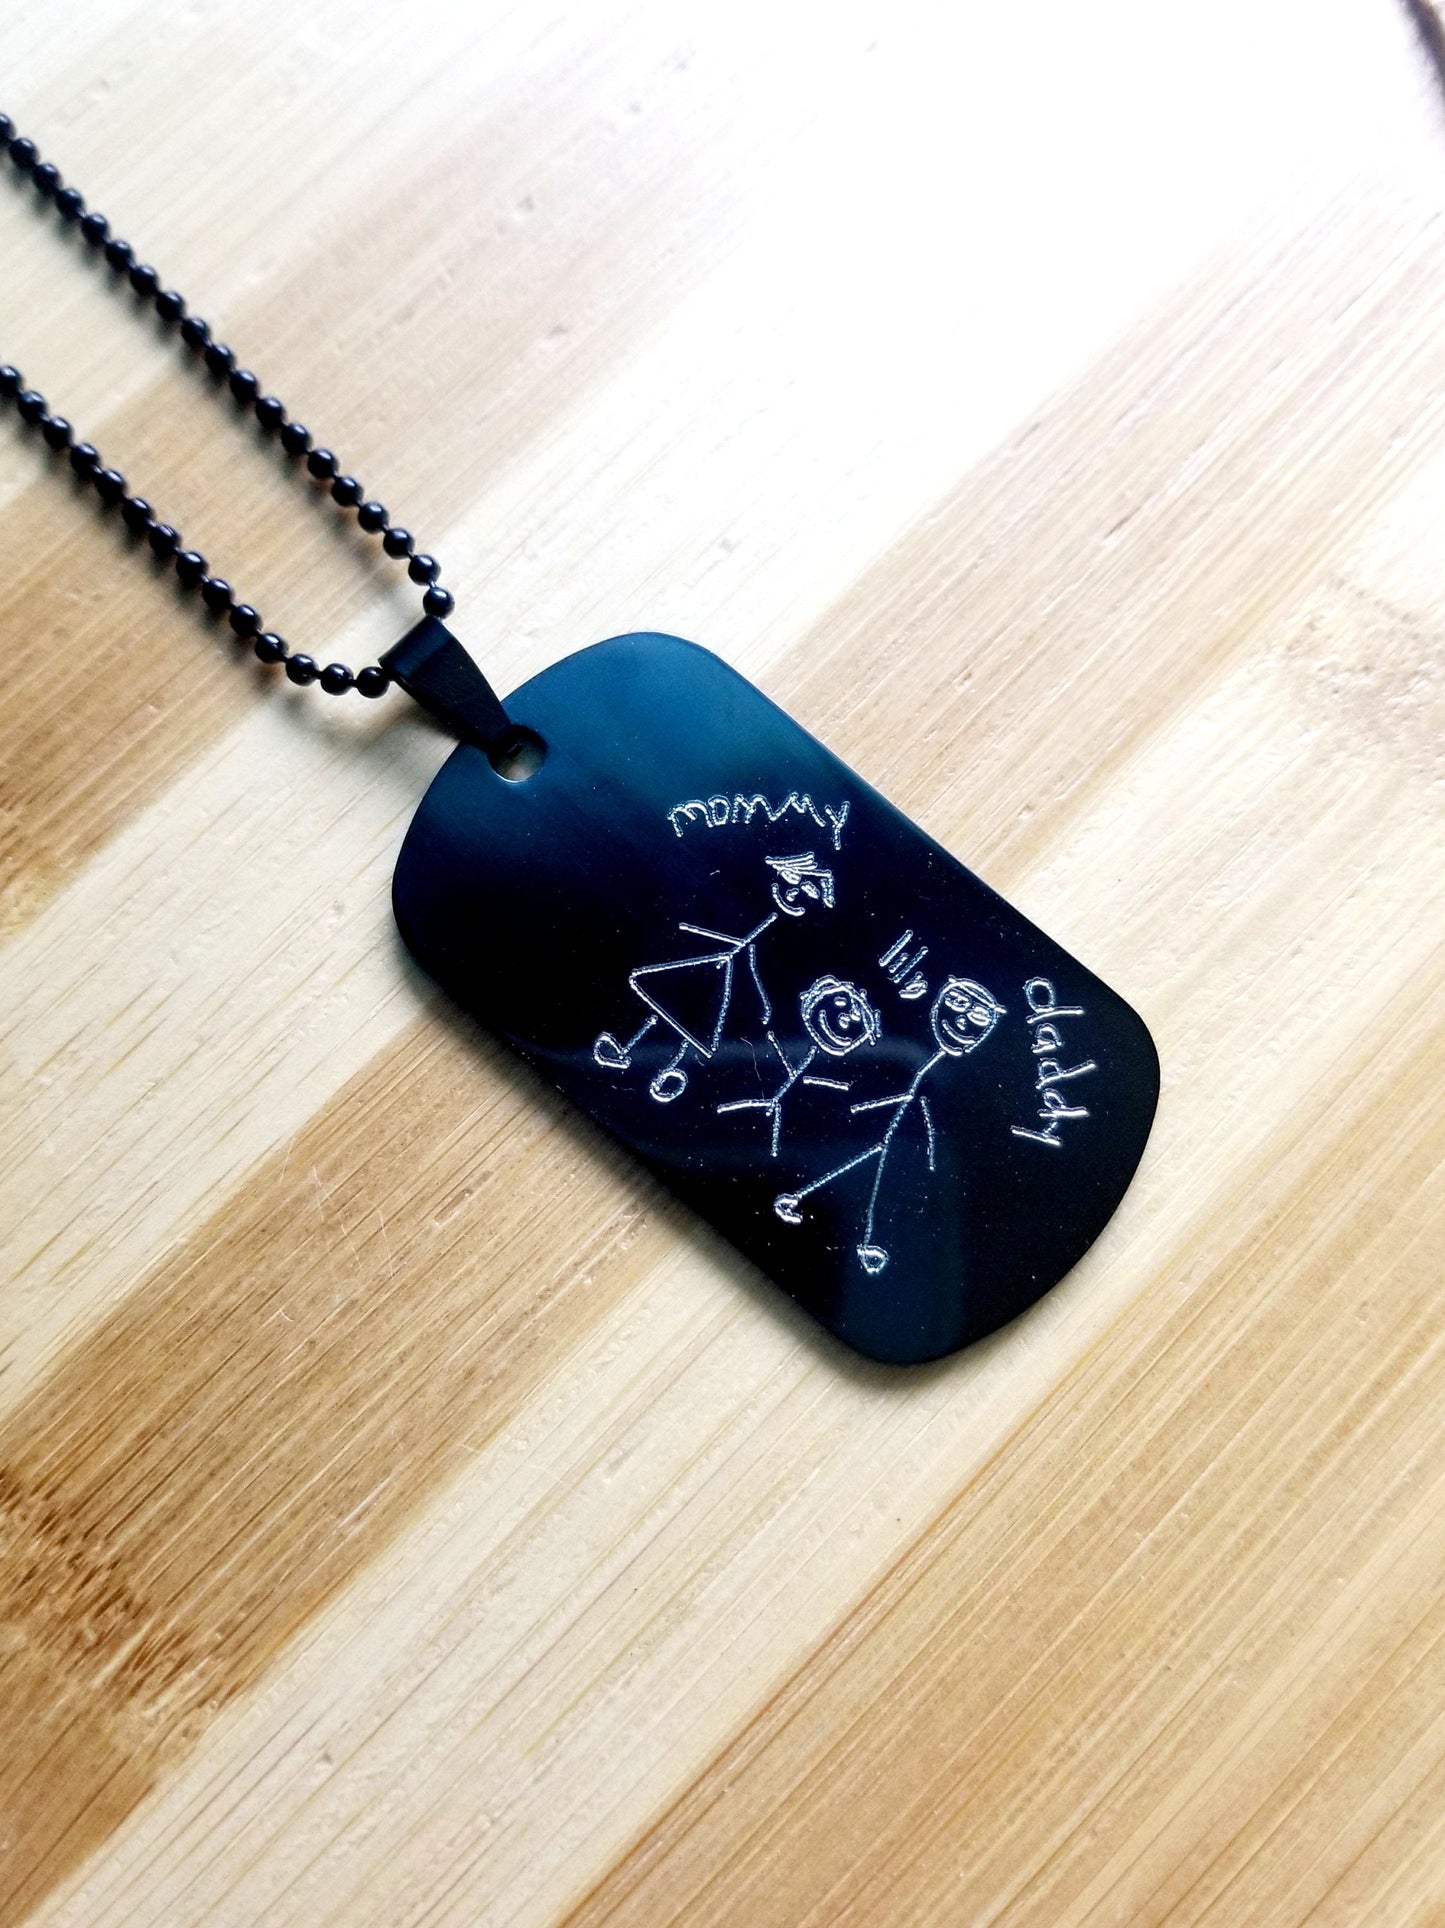 Actual Handwriting engraved on Black necklace, child drawing on military tag pendant